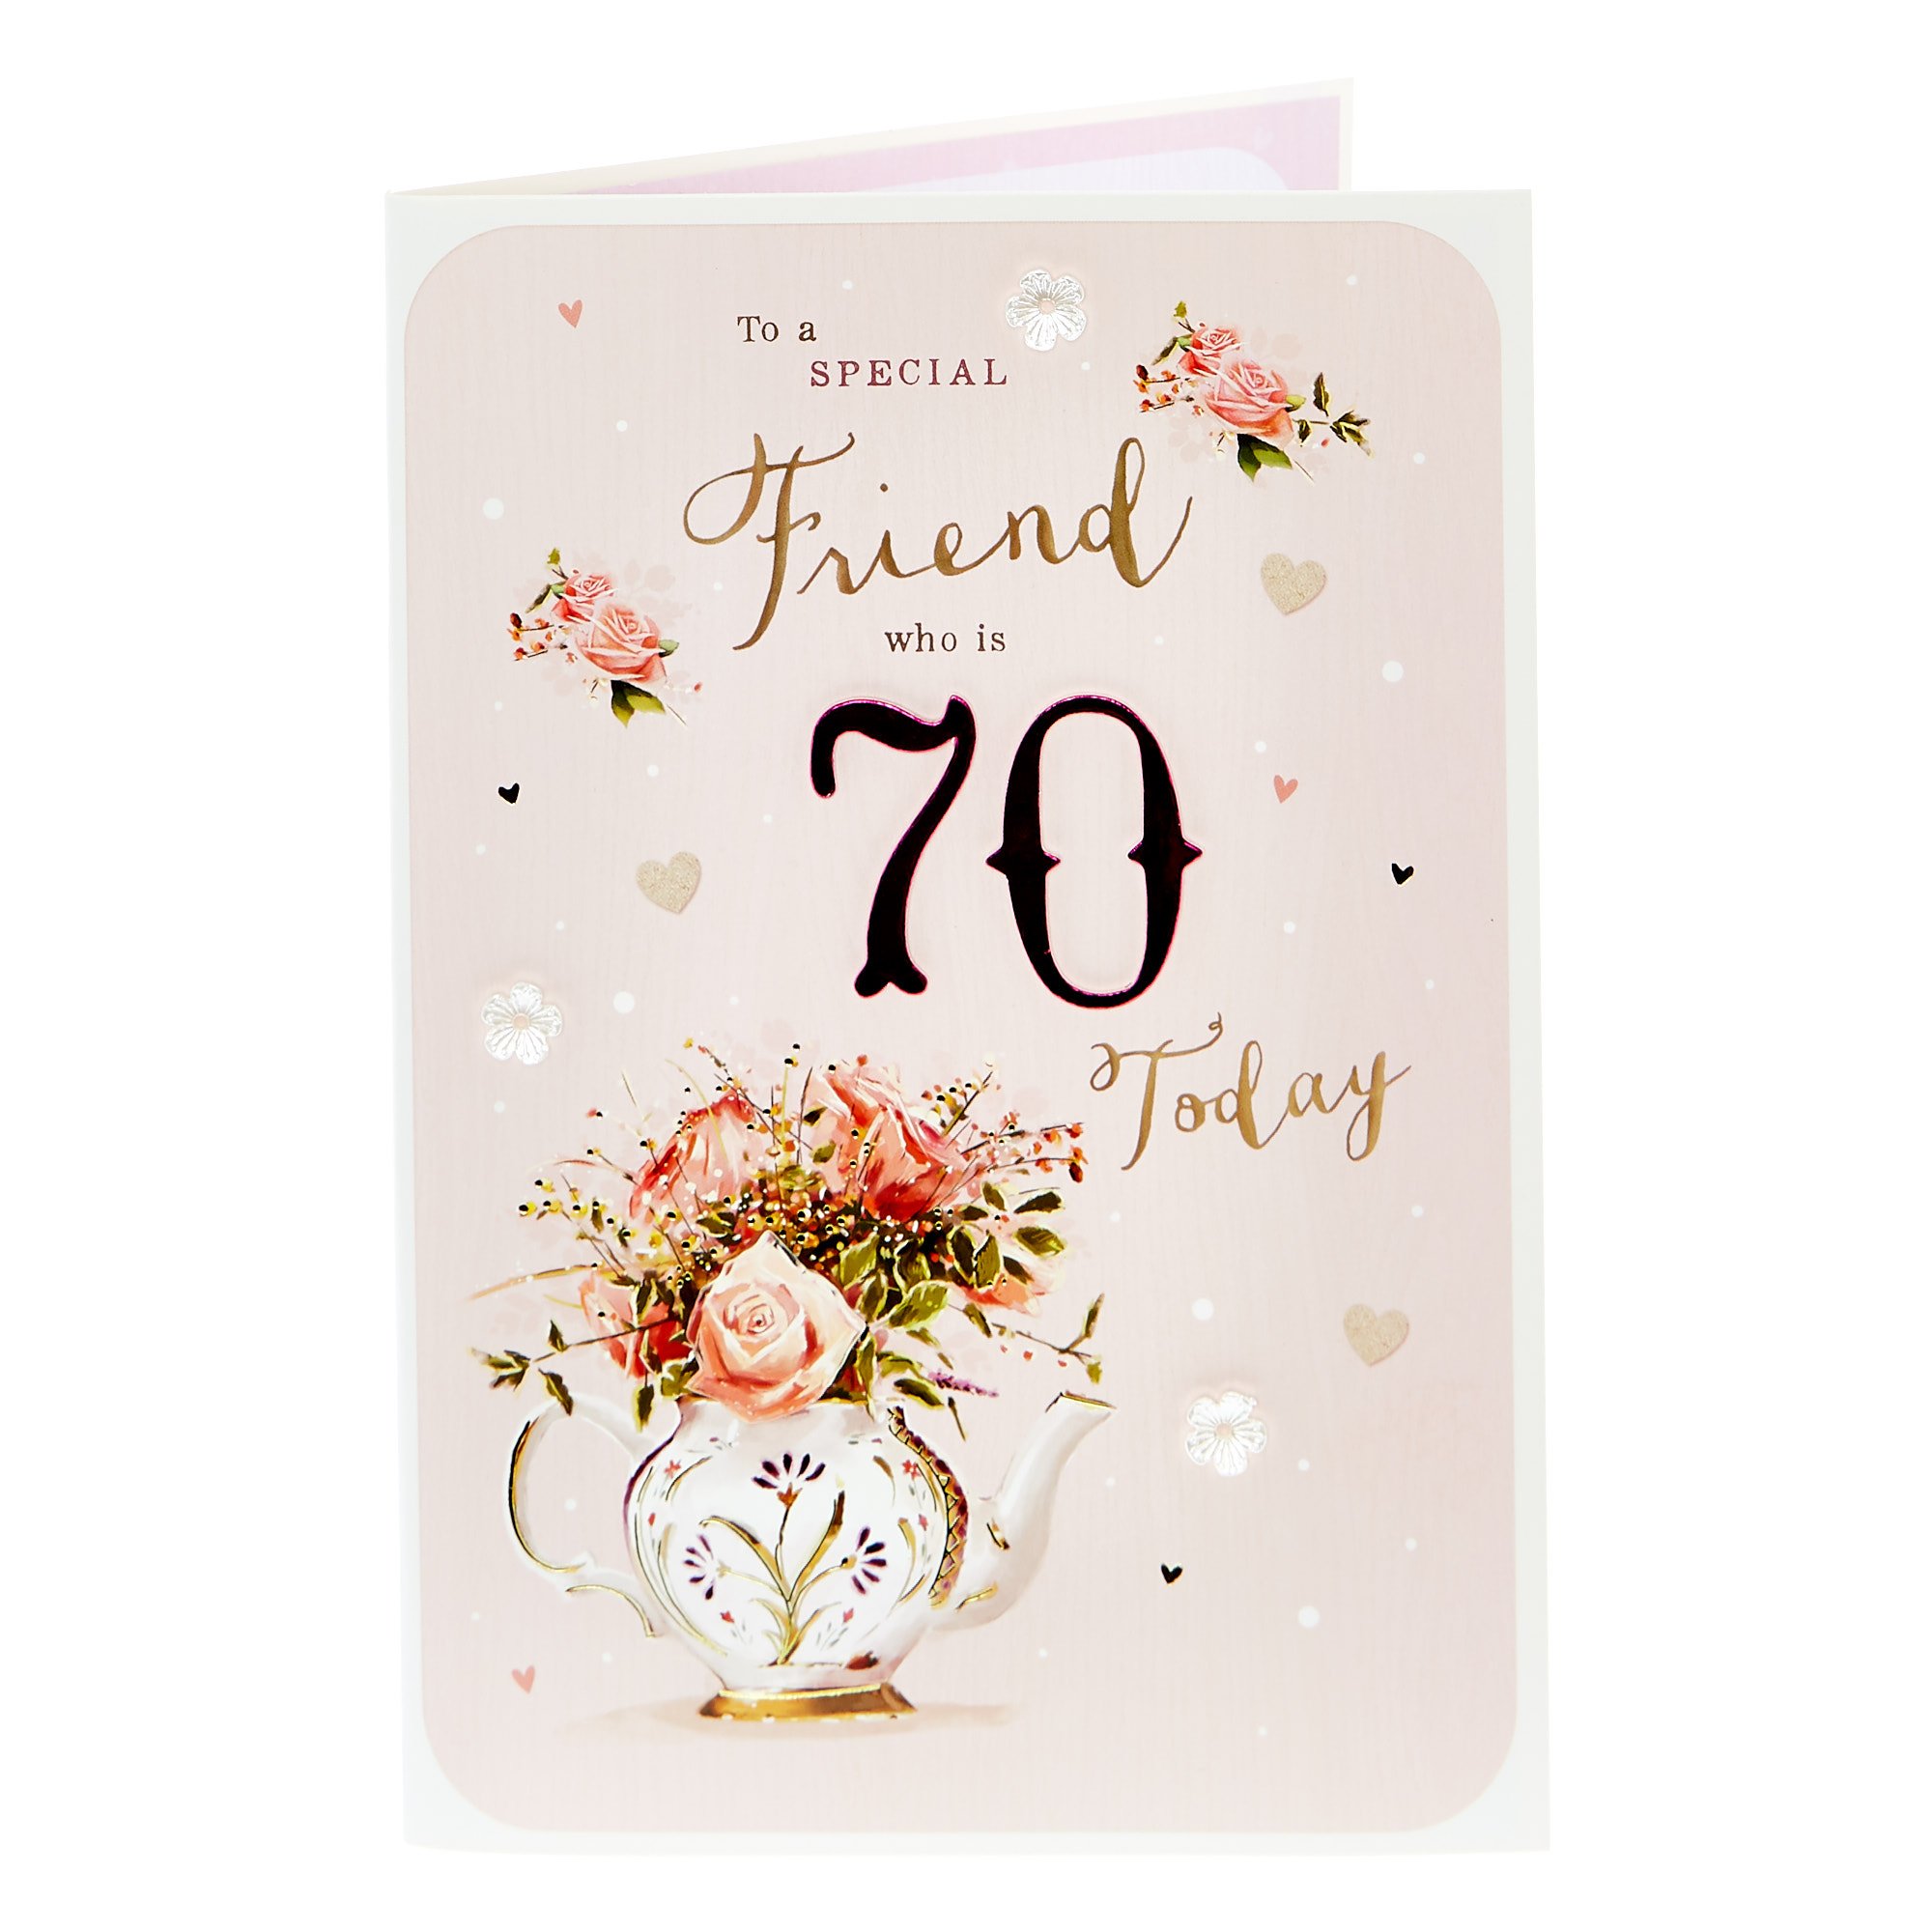 70th Birthday Card - To A Special Friend